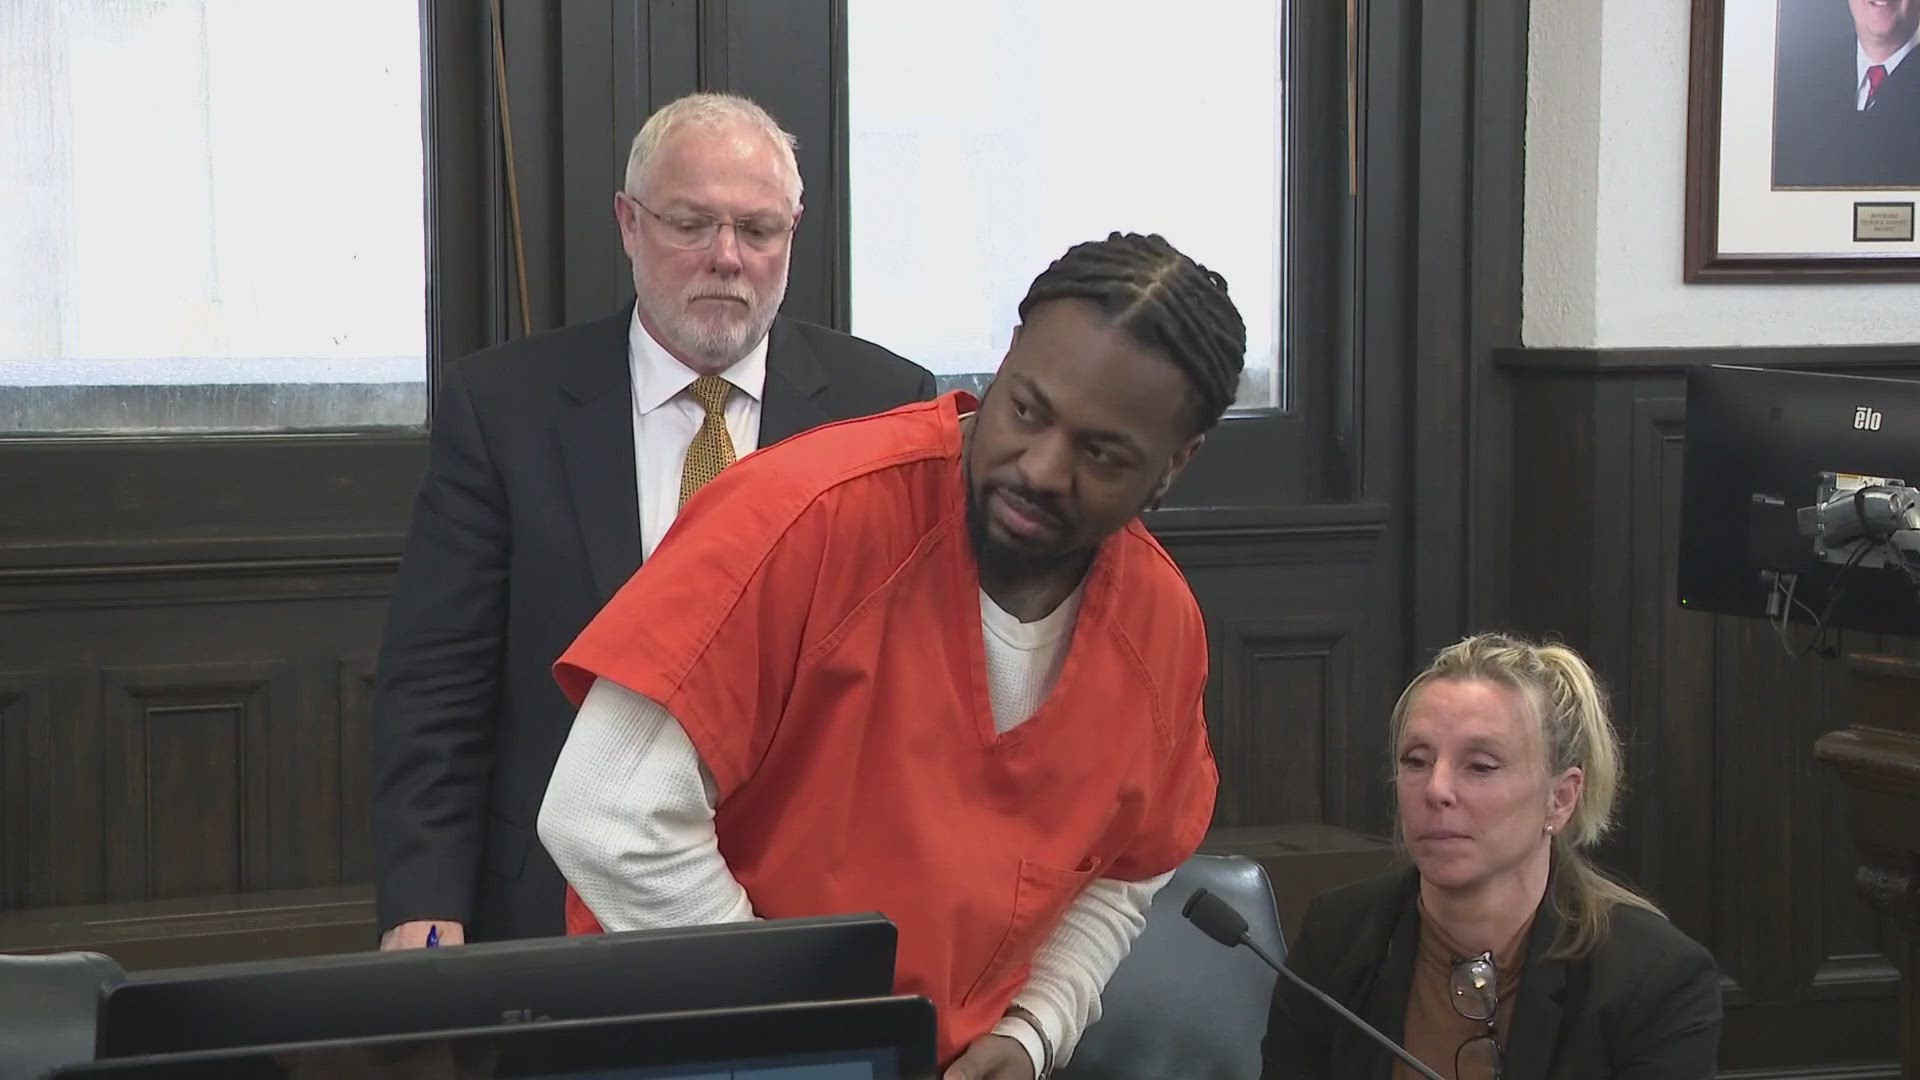 Kinard was found guilty on several charges, including voluntary manslaughter, for last year's shooting death of George "Geo" Jensen on I-76 in Norton.